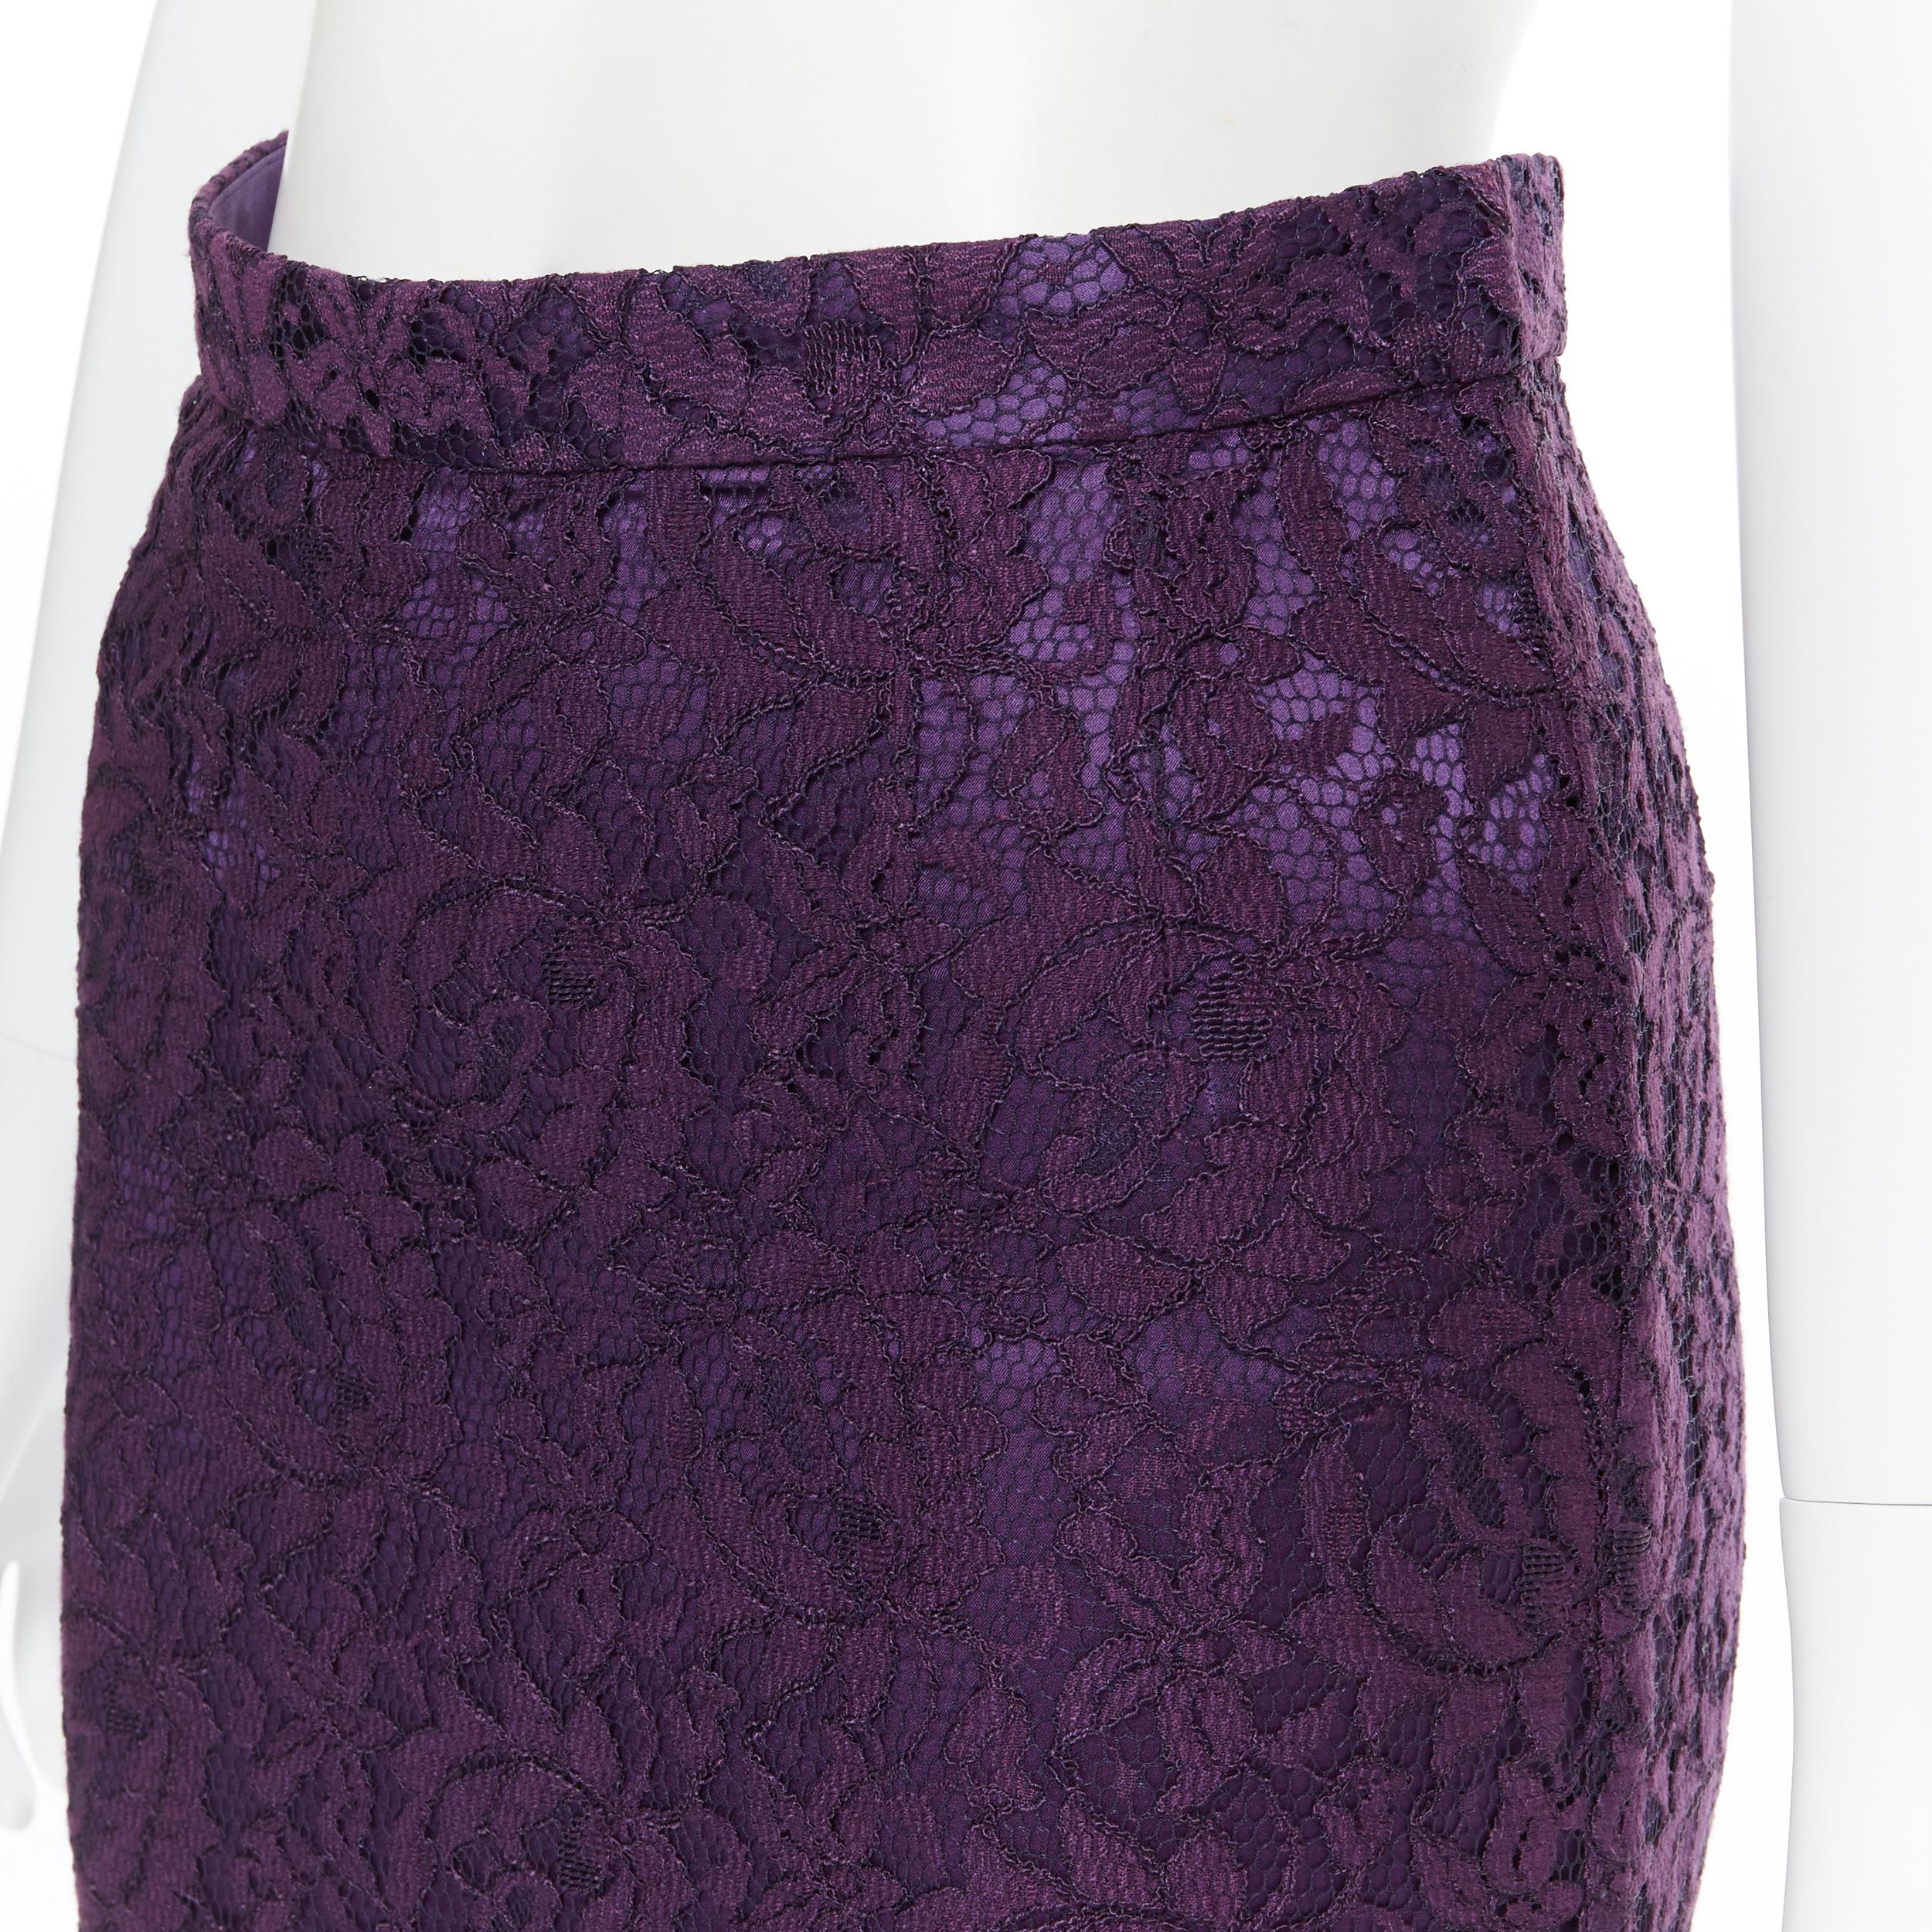 DOLCE GABBANA purple floral lace overlay fitted pencil skirt IT38 XS 
Reference: LNKO/A01718 
Brand: Dolce Gabbana 
Designer: Domenico Dolce and Stefano Gabbana 
Material: Unknown 
Color: Purple 
Pattern: Solid 
Closure: Zip 
Extra Detail: Floral